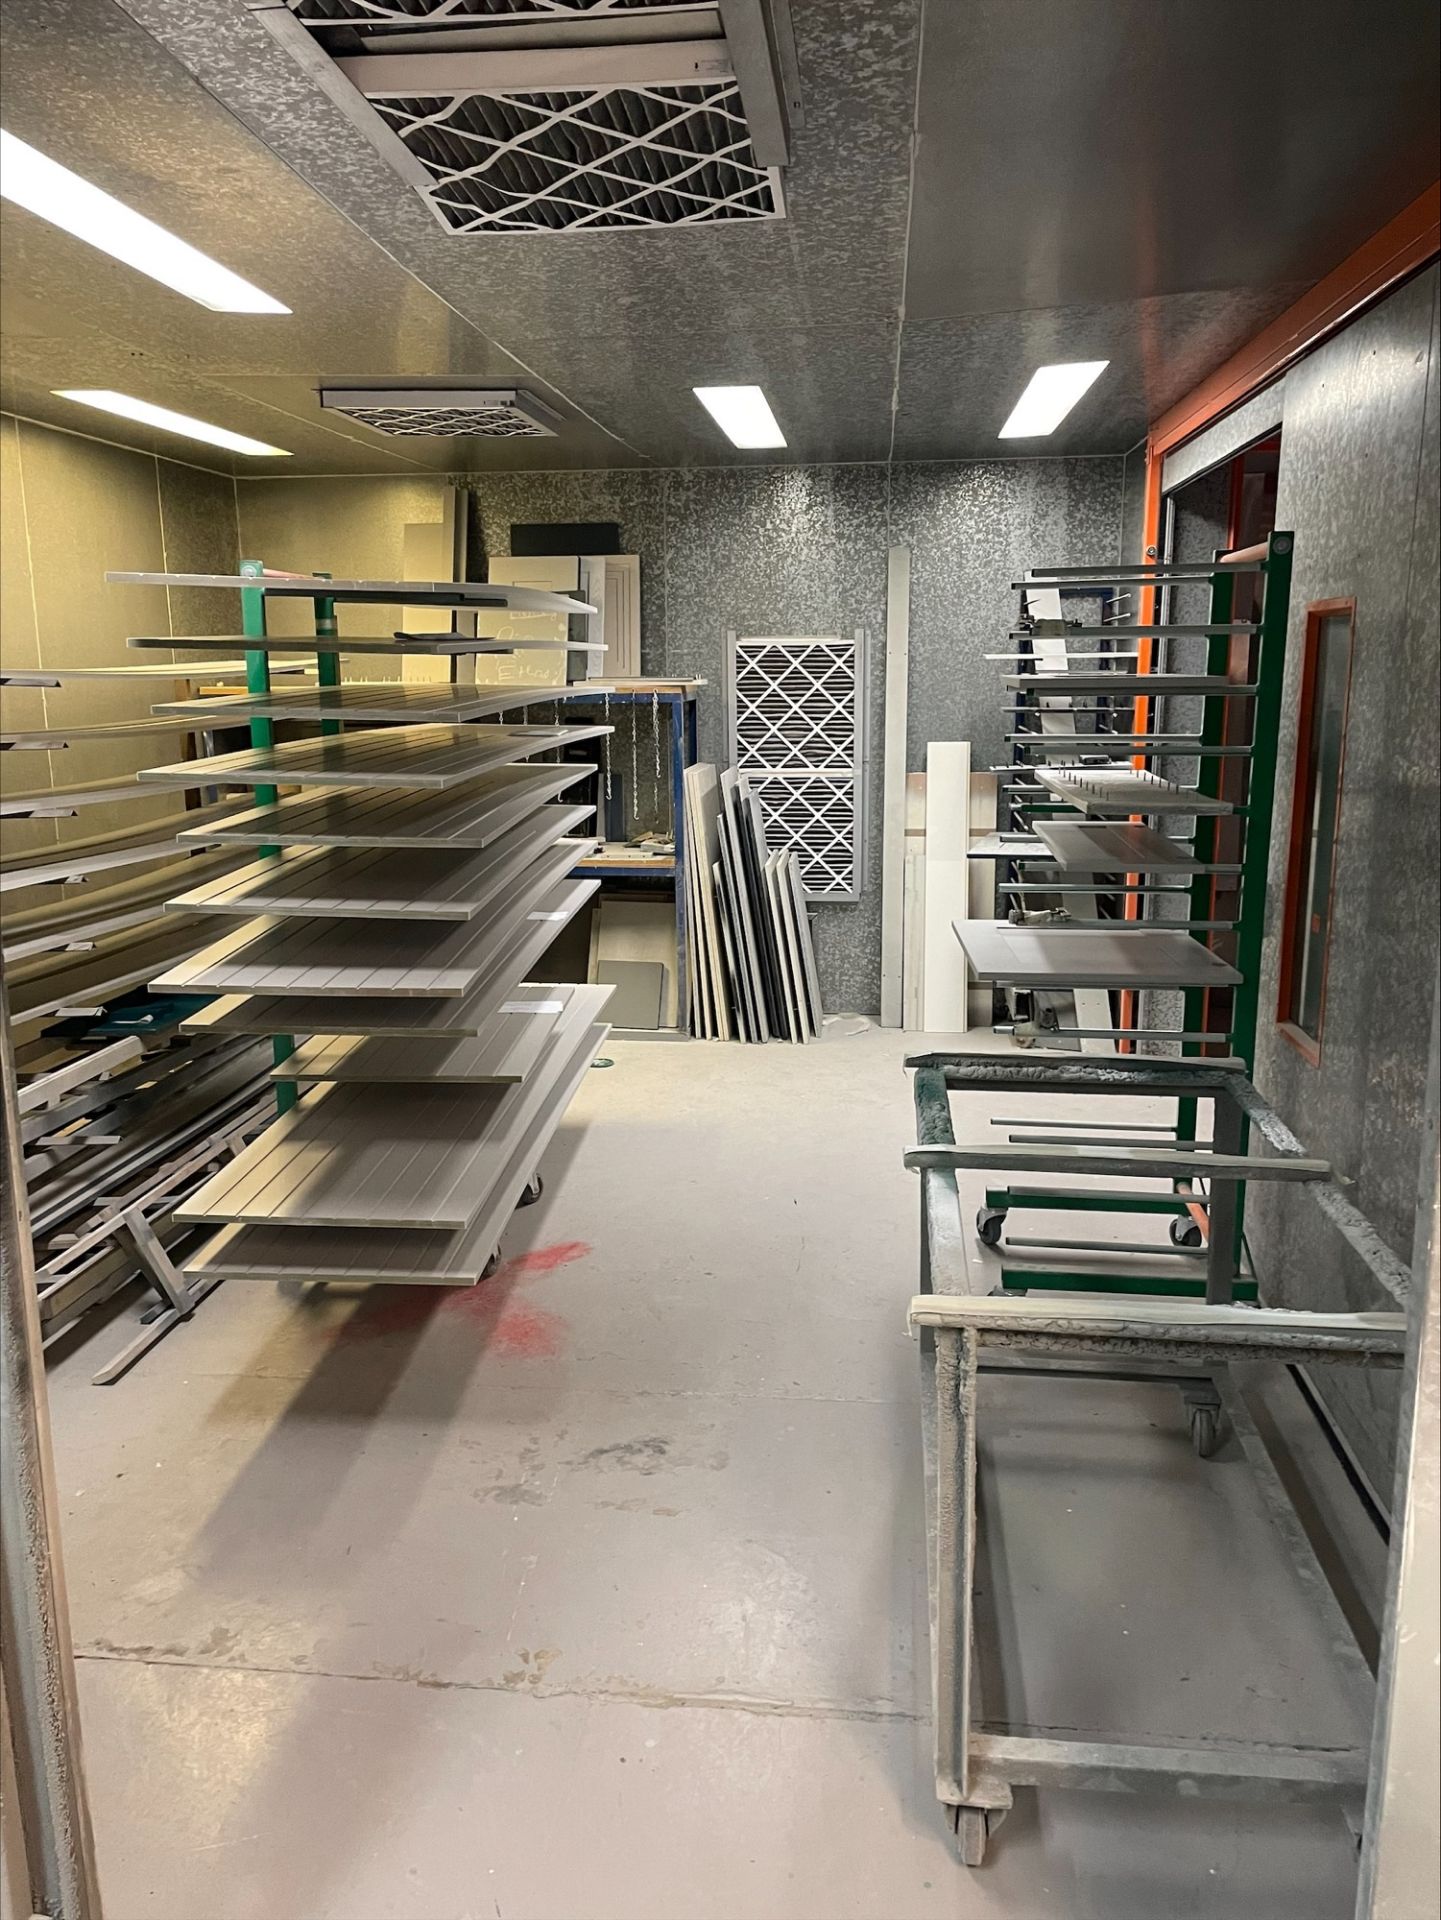 Schuberts Technical Services Limited Free standing/sectional 3 zone spray room and oven system - Image 4 of 10